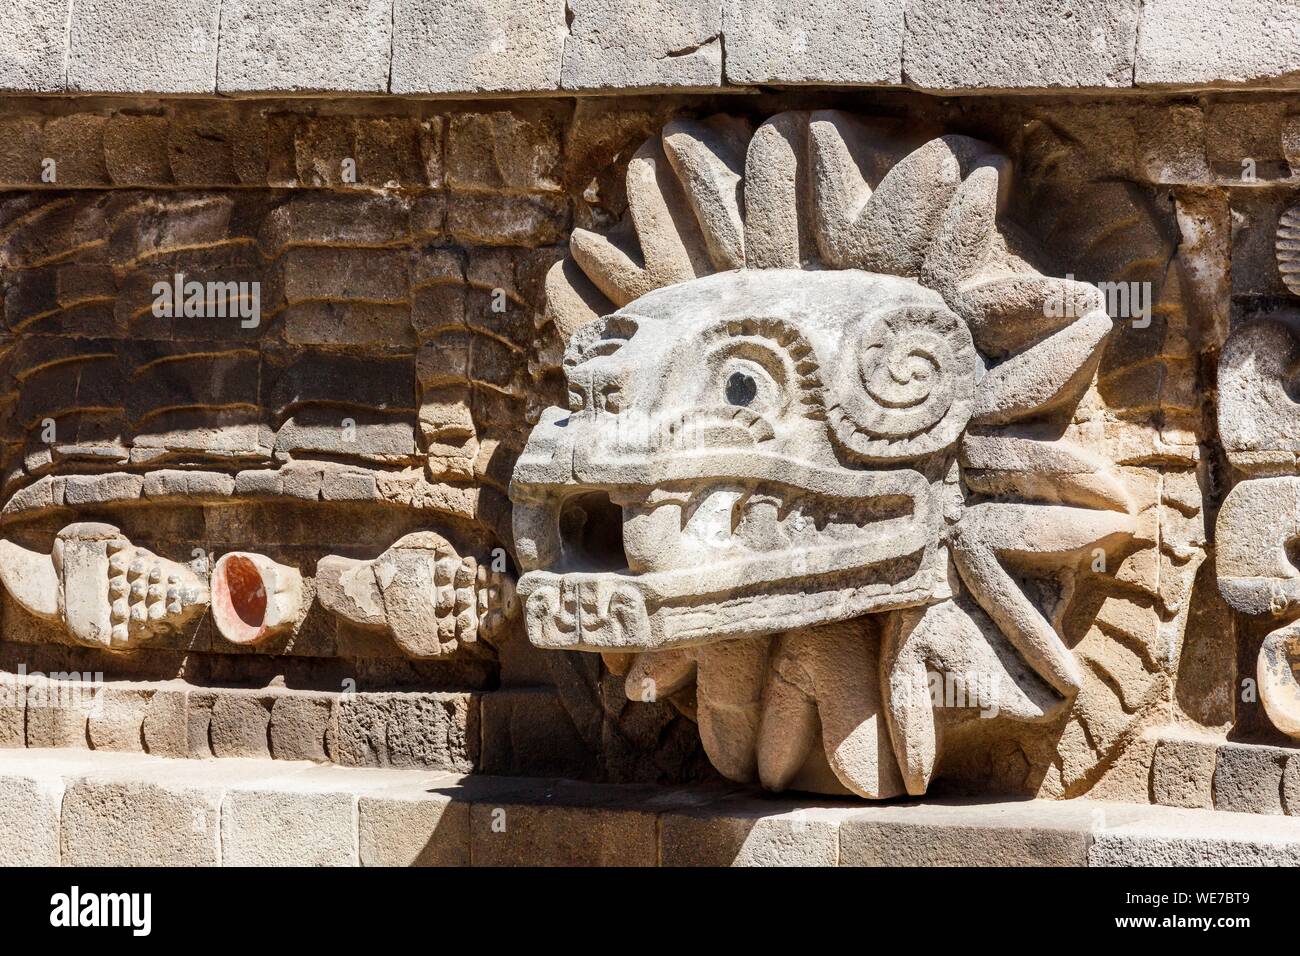 Mexico, Mexico state, Teotihuacan listed as World Heritage by UNESCO, temple of Quetzalcoatl, Quetzalcoatl (the feathered serpent) sculpture Stock Photo